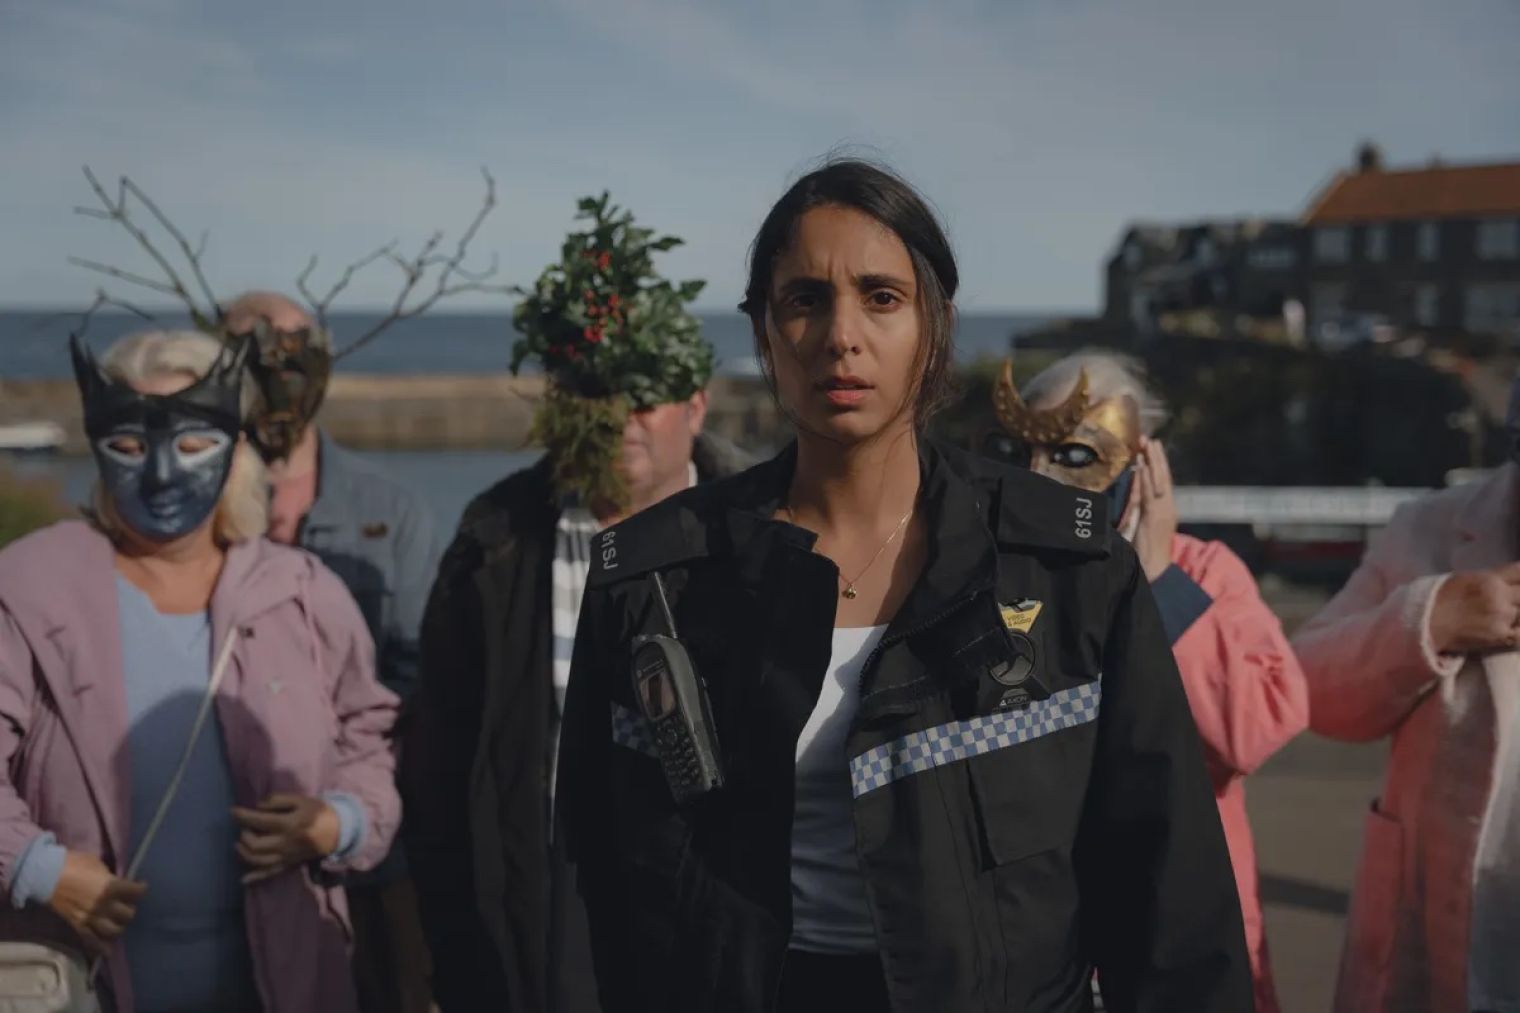 Anjli Mohindra leads the cast as police officer Grace in Alibi’s “chilling, atmospheric” new crime drama ’The Red King’ which premieres tonight at 9pm